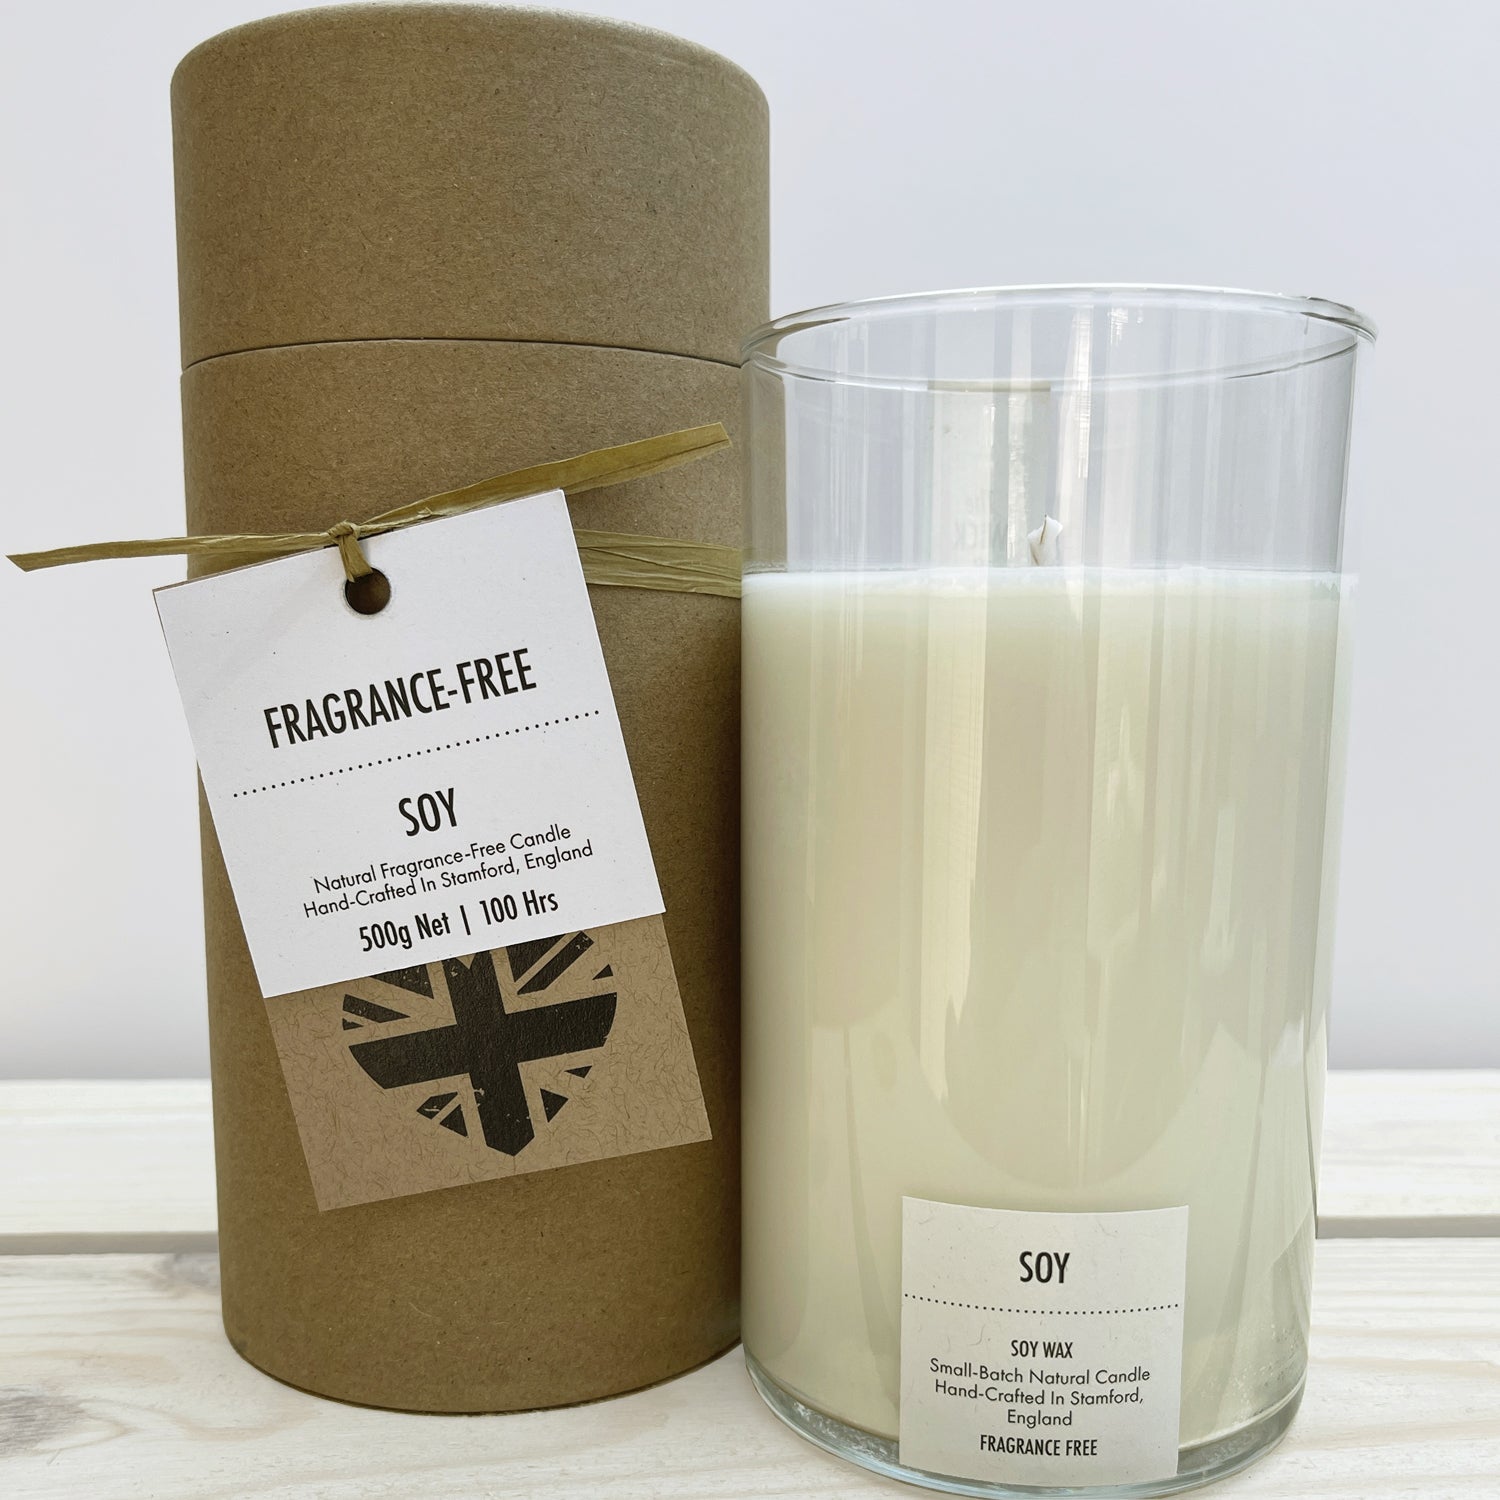 Fragrance-Free - Everyday Soy Candle (500g Net)